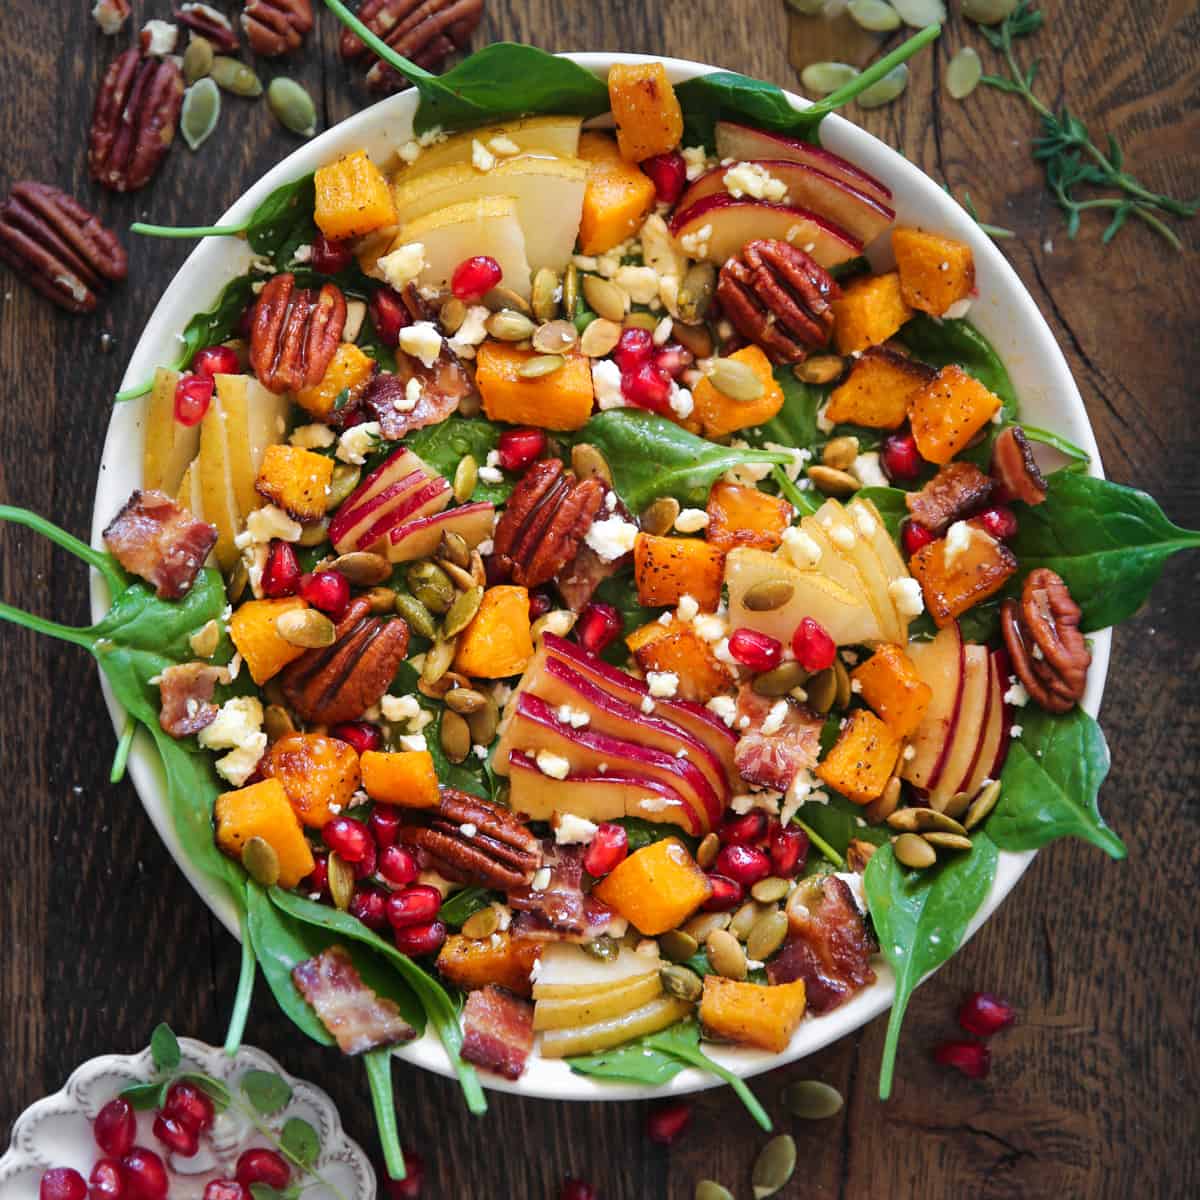 Fall Harvest Salad With Roasted Brassicas, Fingerlings, and